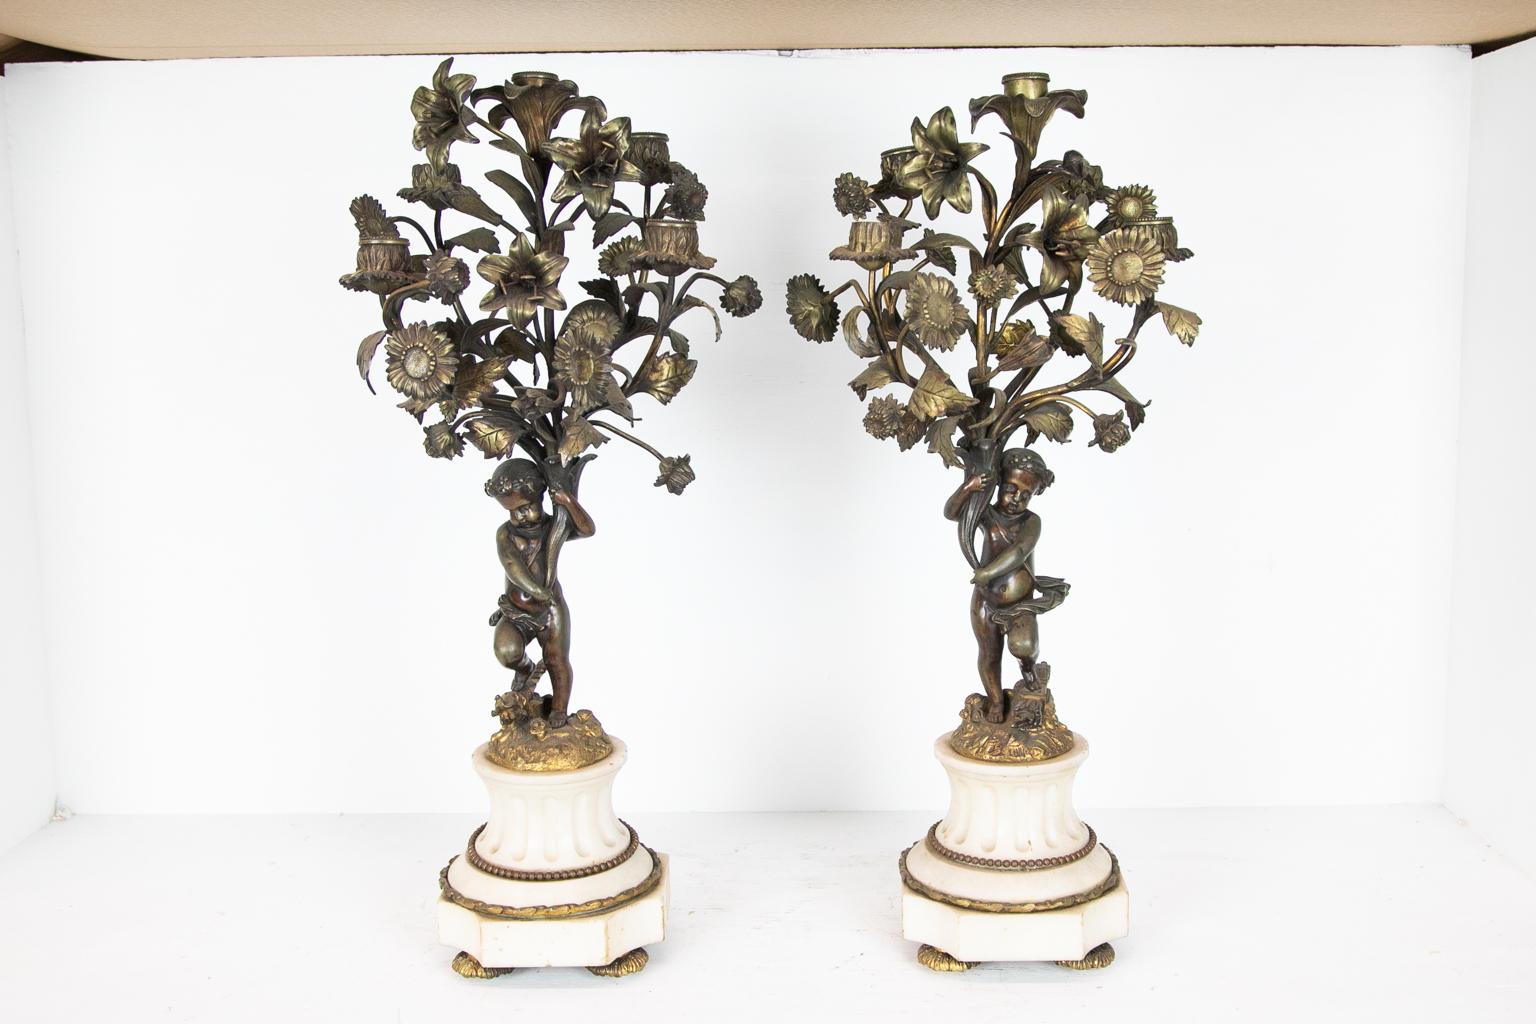 Pair of five hole cupid candelabra, the bases are white fluted marble with ormolu moldings and feet. The cupids are standing on quivers and torches while holding floral branches. The gilding is mostly worn down to the bronze metal.
  